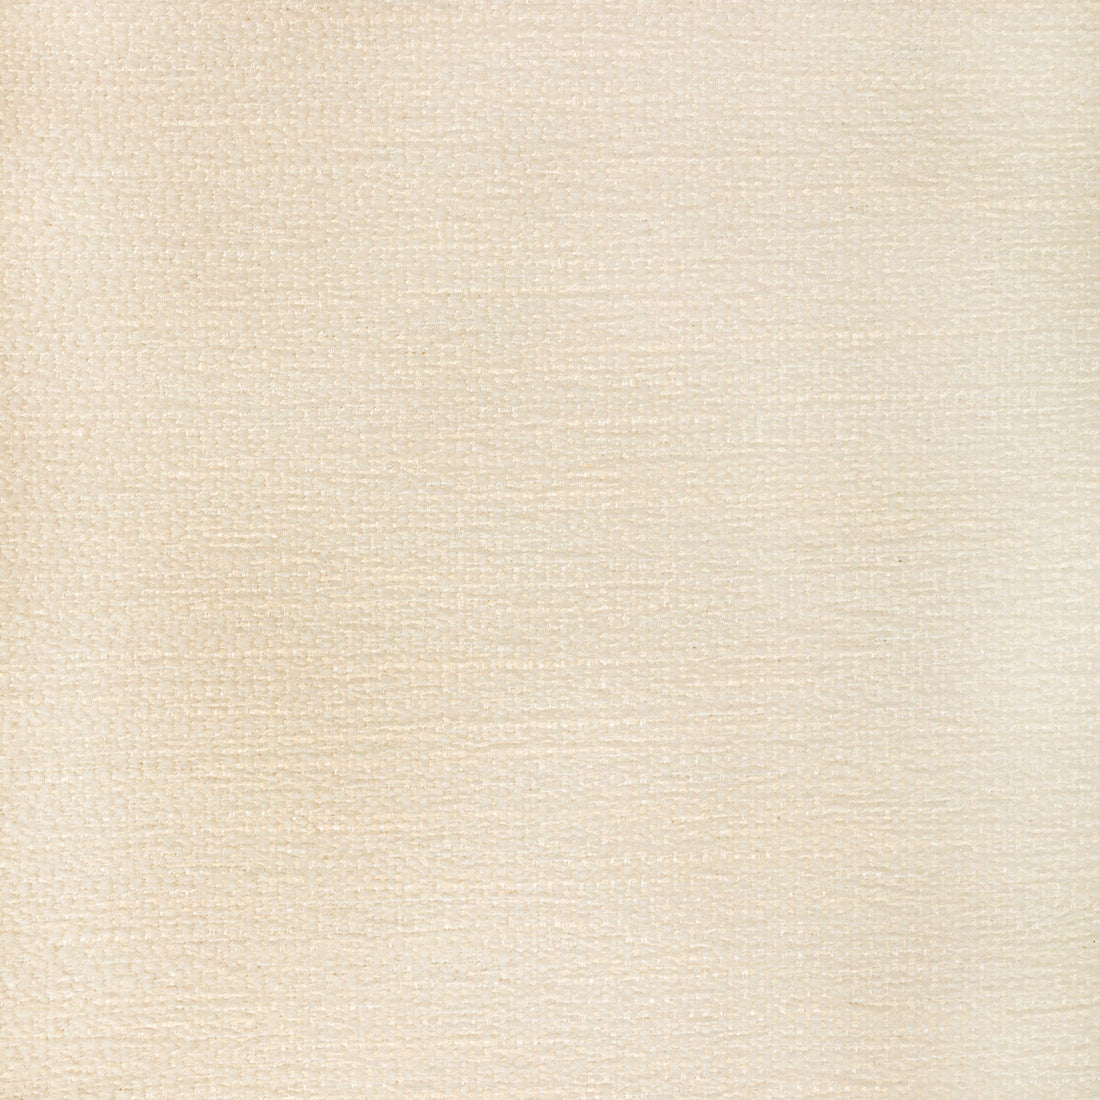 Recoup fabric in sandbar color - pattern 36569.1.0 - by Kravet Contract in the Seaqual collection